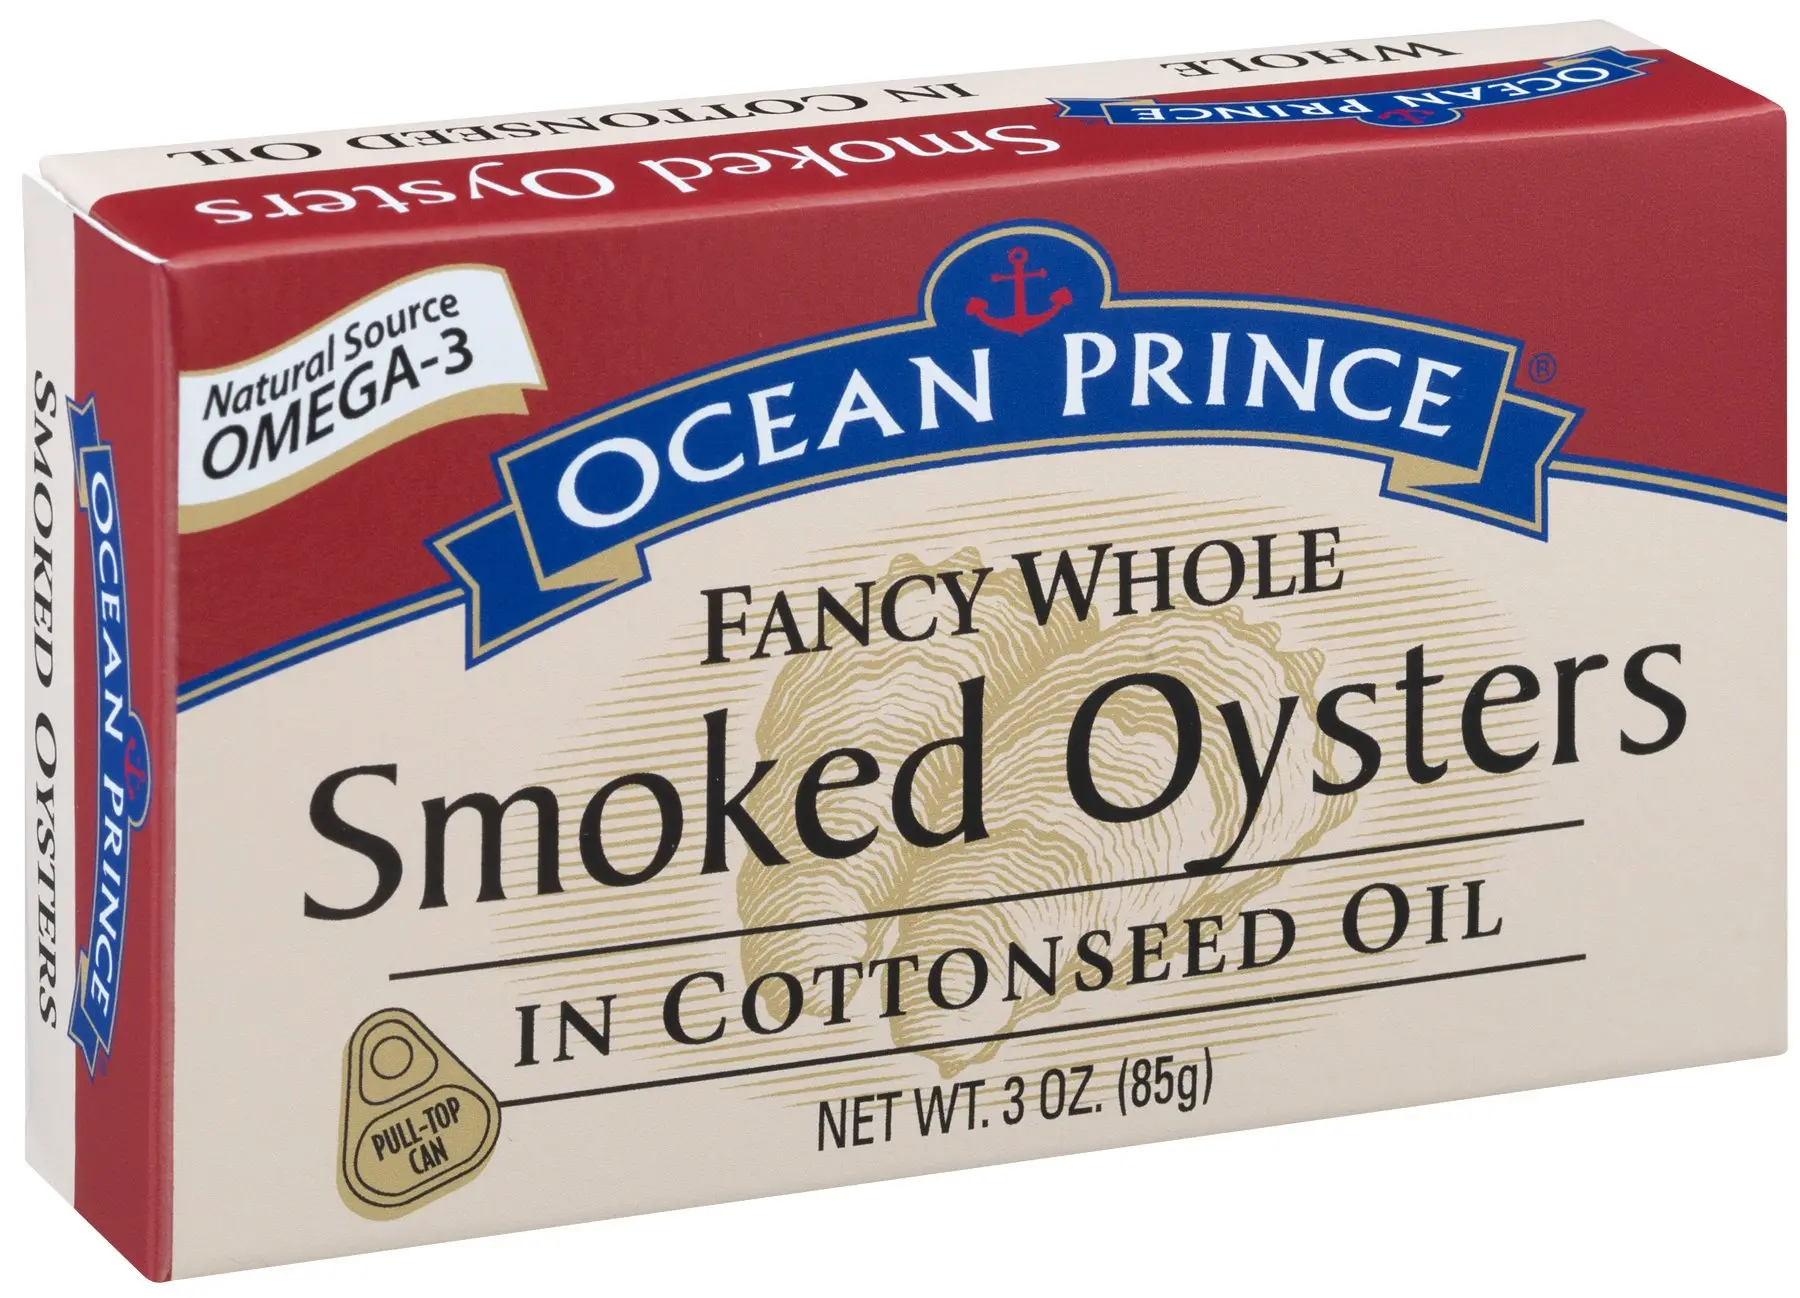 smoked oysters in cottonseed oil - Can cats eat smoked oysters in cottonseed oil